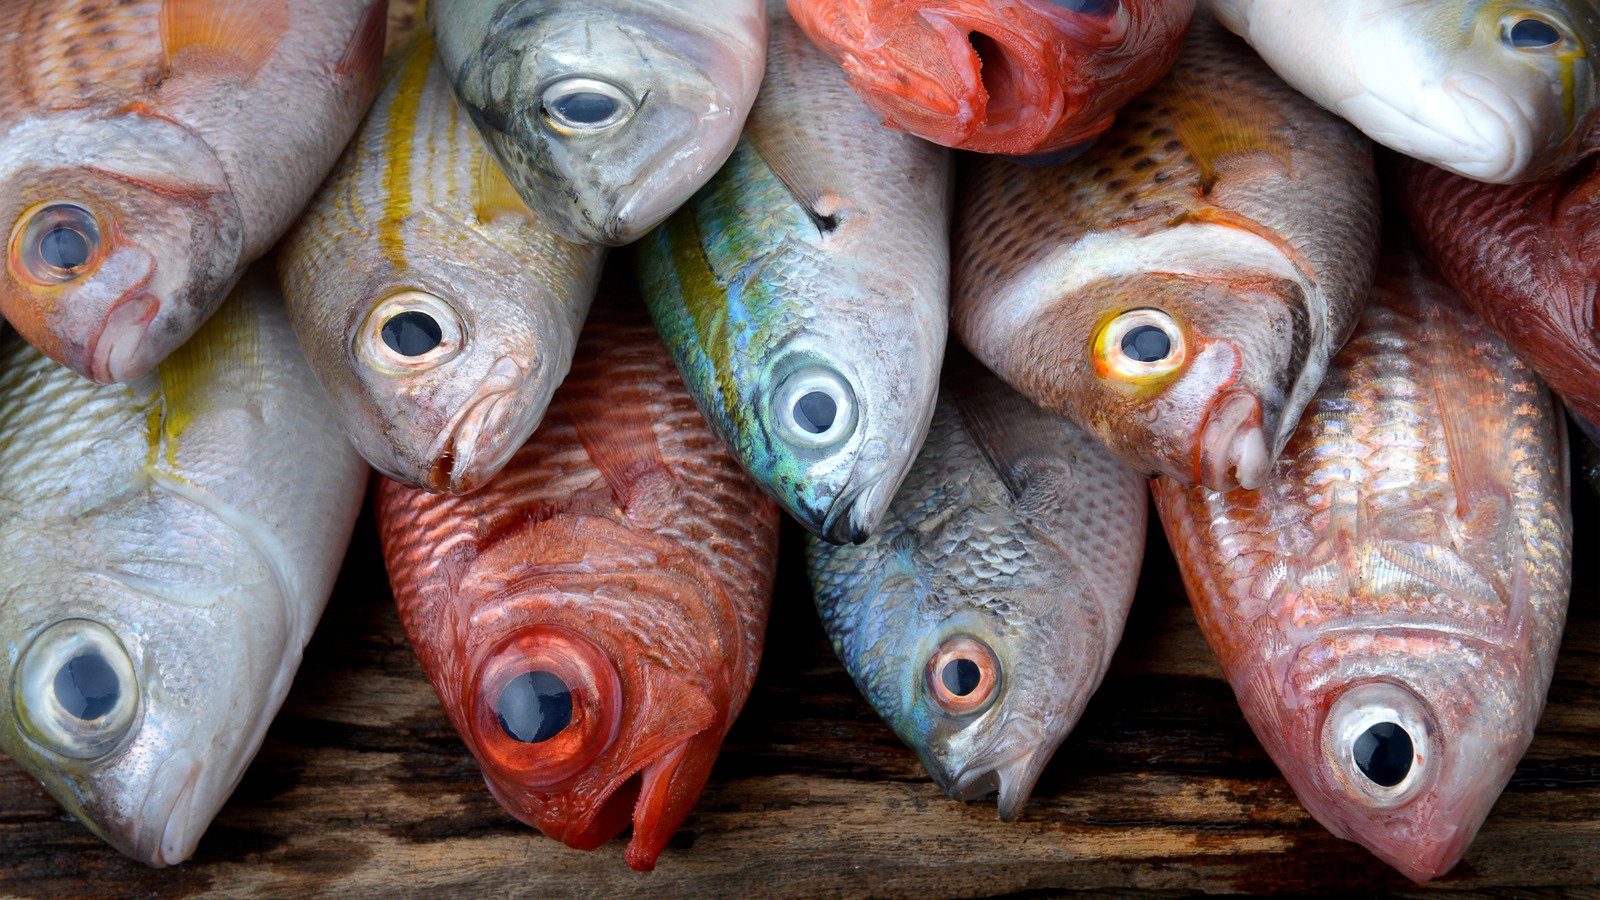 12 Cheap Fish You Should Absolutely Never Eat - Mashed